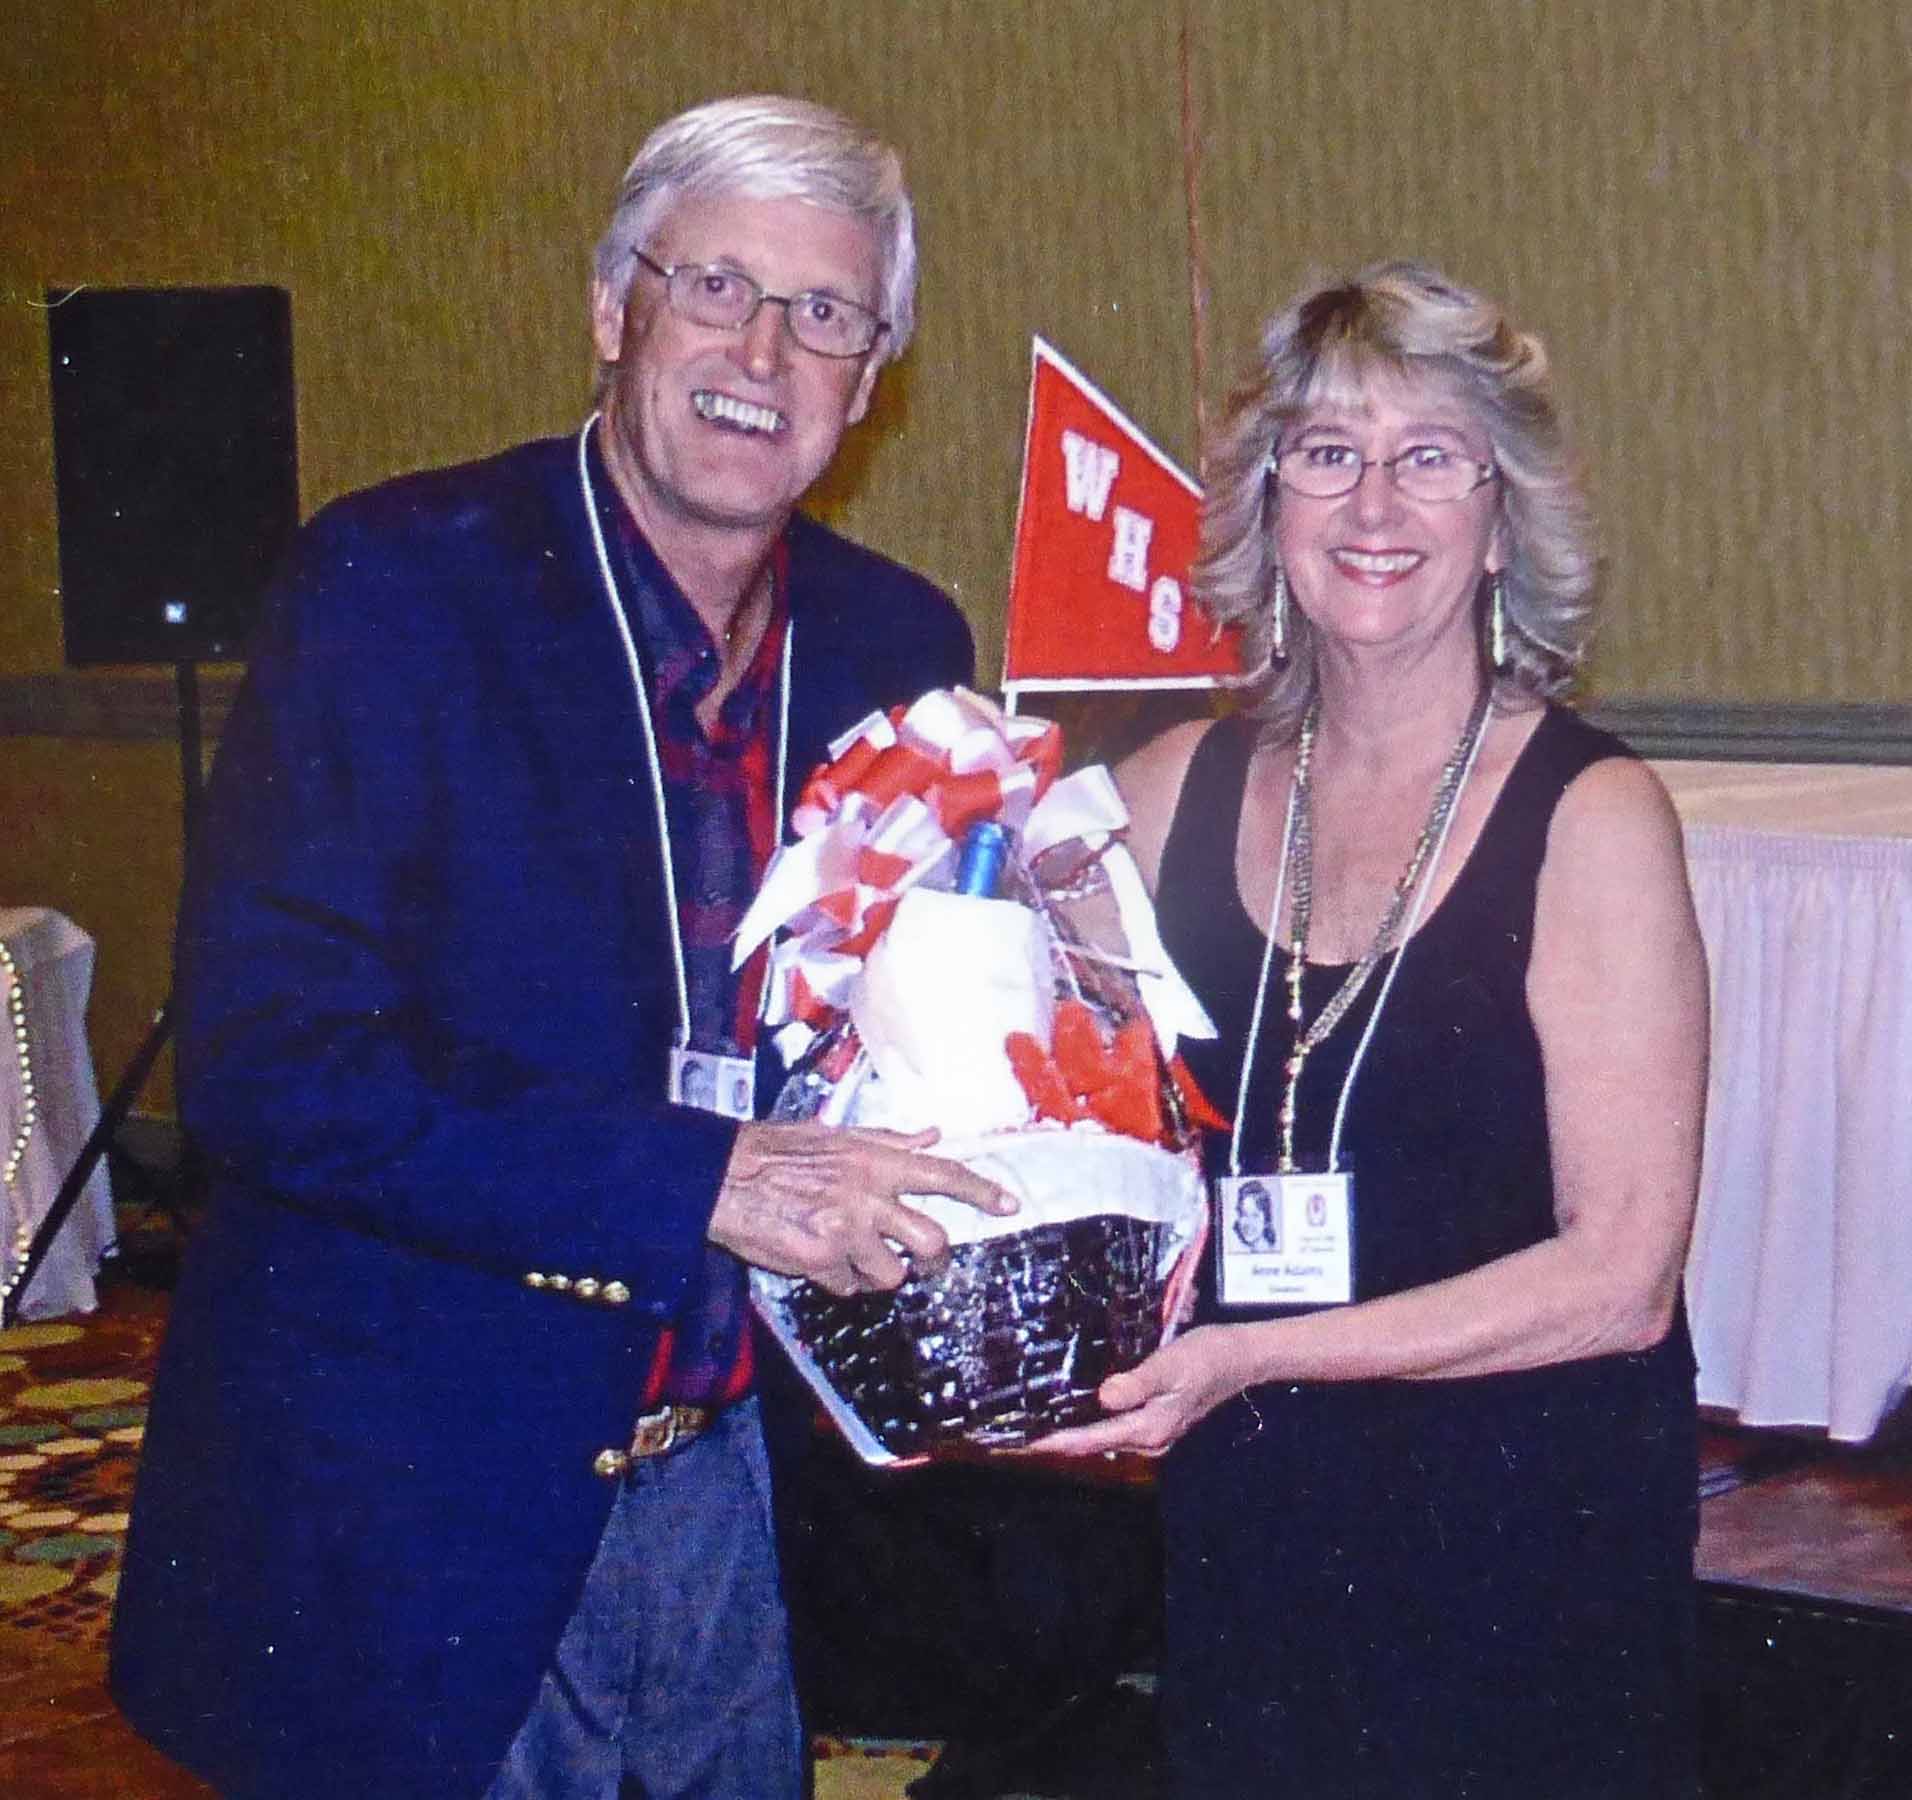 Anne Adams Goodwin presenting a raffle prize to Bill Heck.